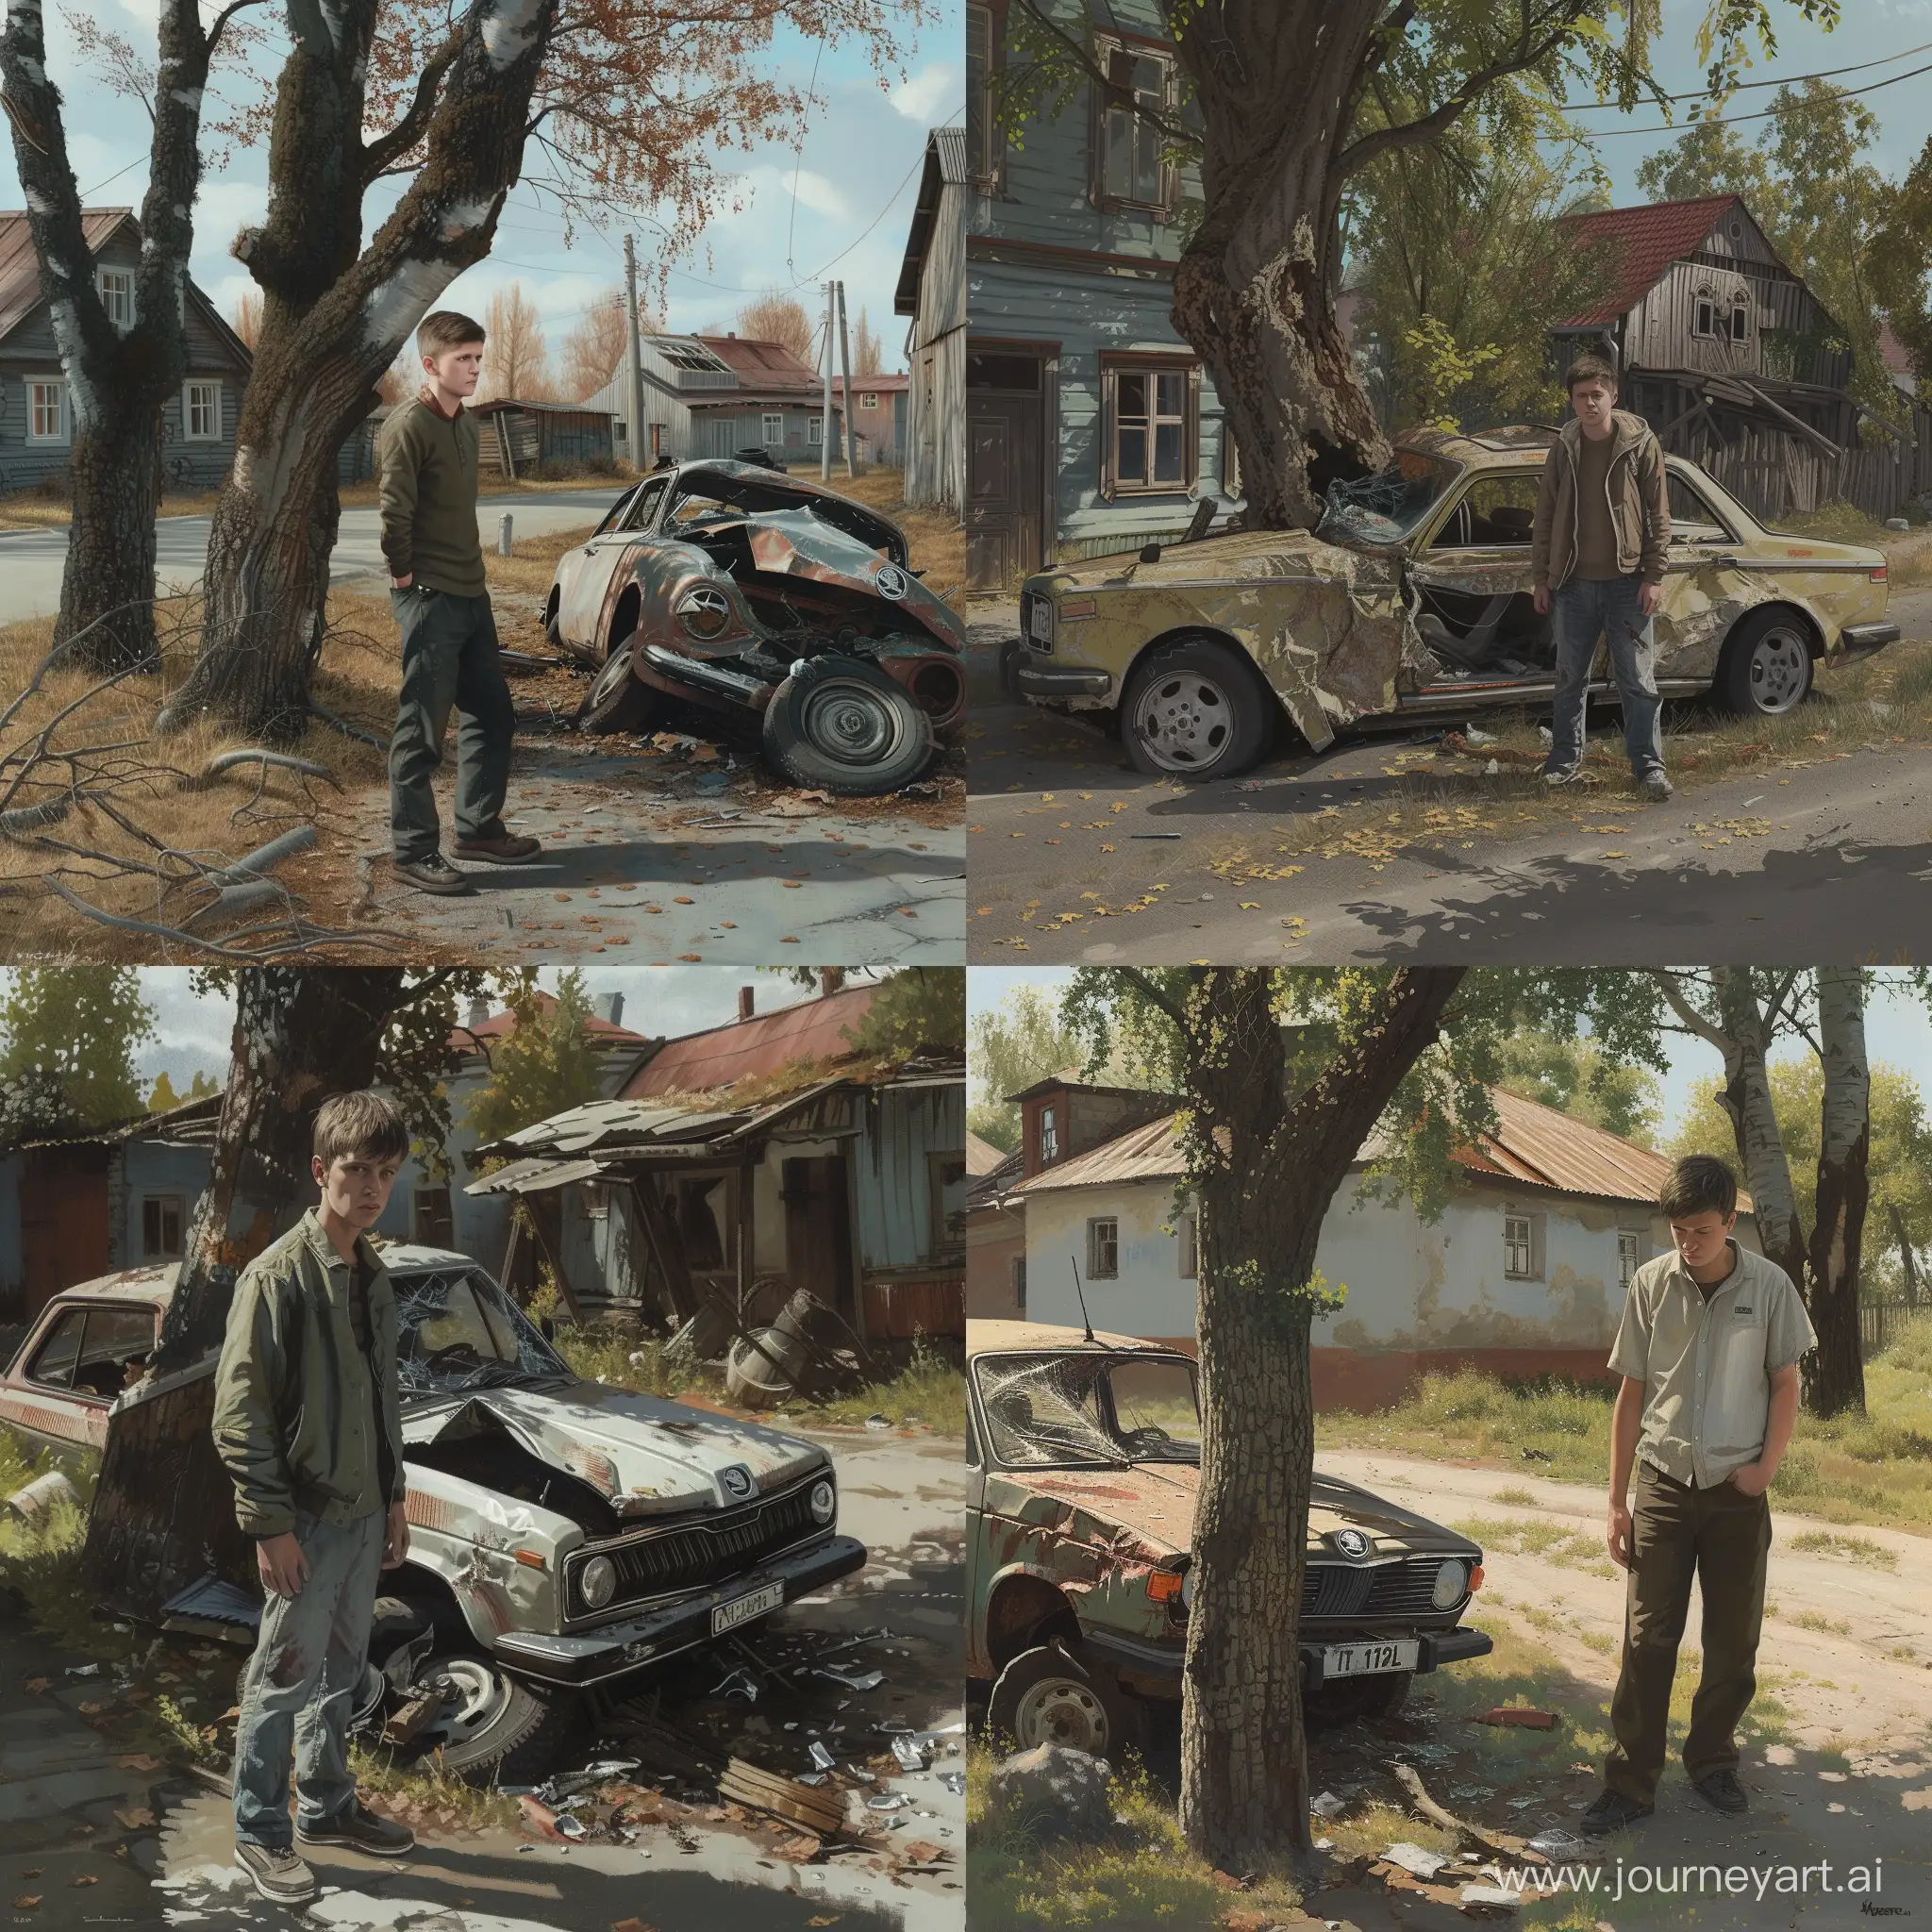 Realistic art: young gay stands near his crashed skoda 120L. Car is crashed from colliding with tree. Location: Roadside near post soviet village.